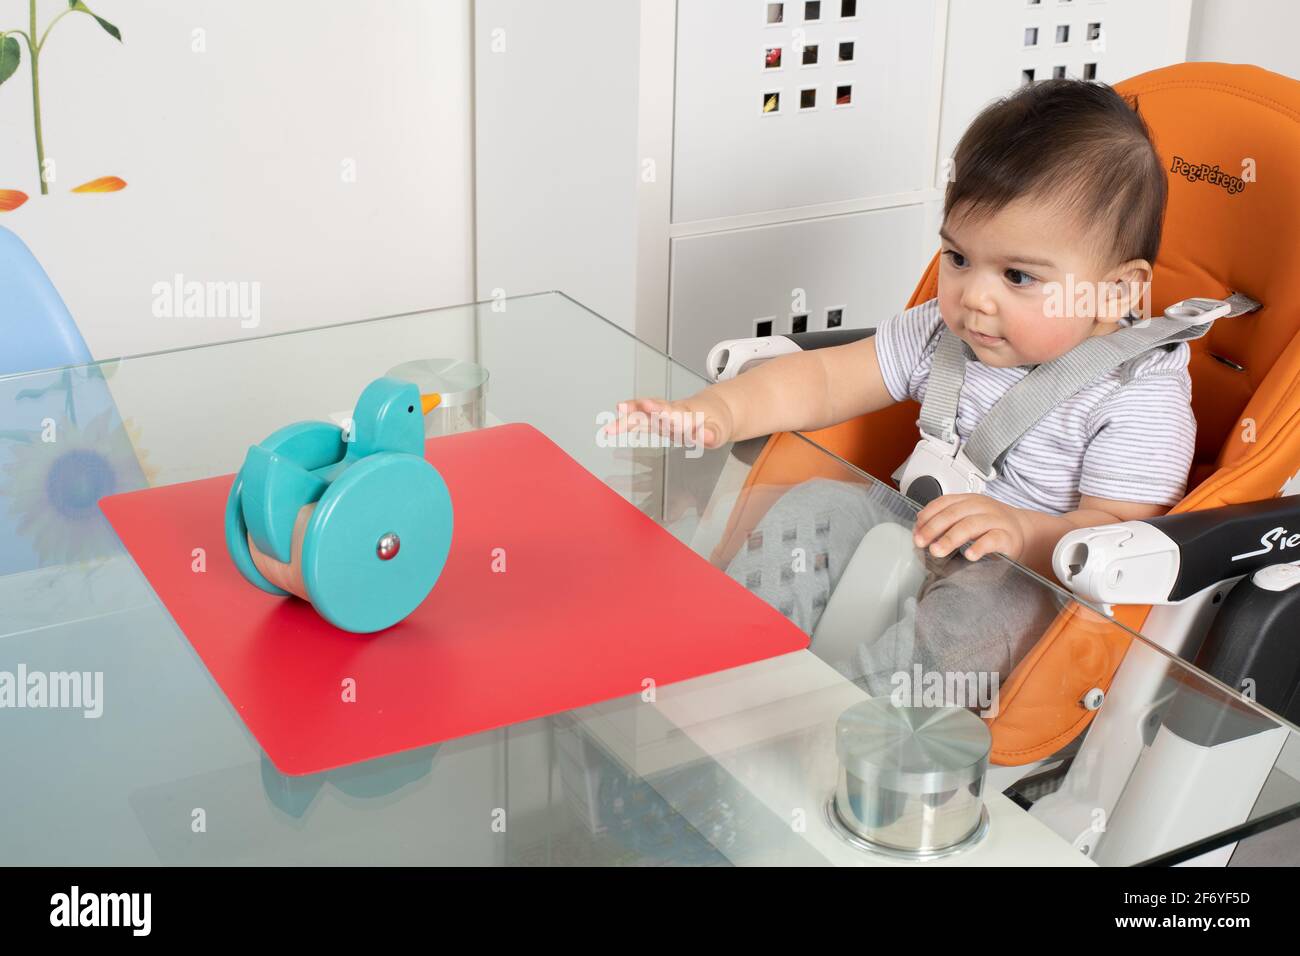 8 month old baby boy sitting in high chair at table Piaget Object Permanence sequence #1 viewing toy on table Stock Photo